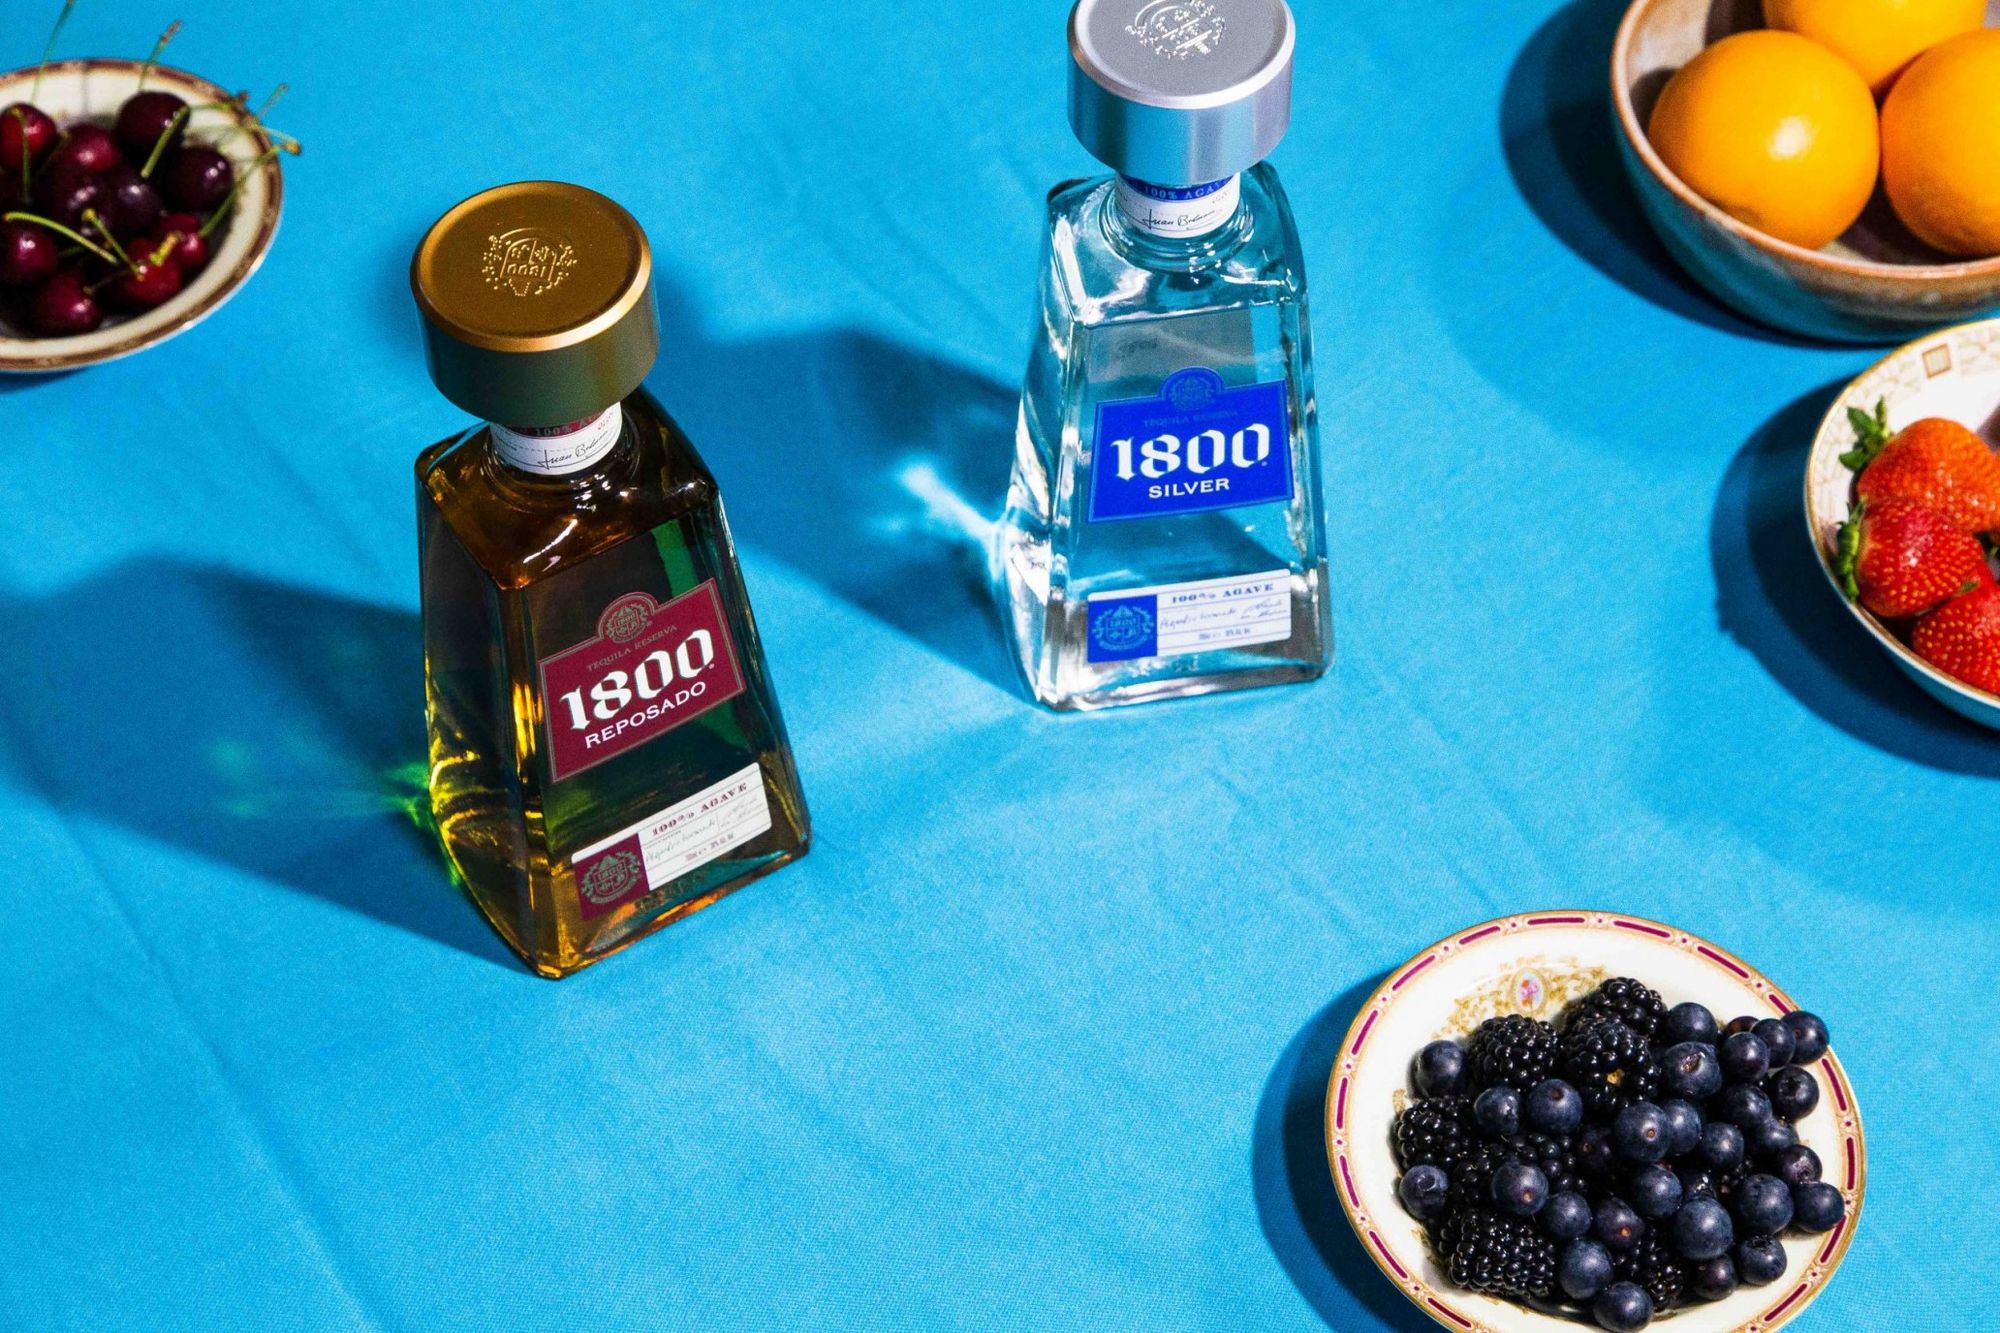 Get Hayley Dixon's advice on hosting the perfect tequila picnic